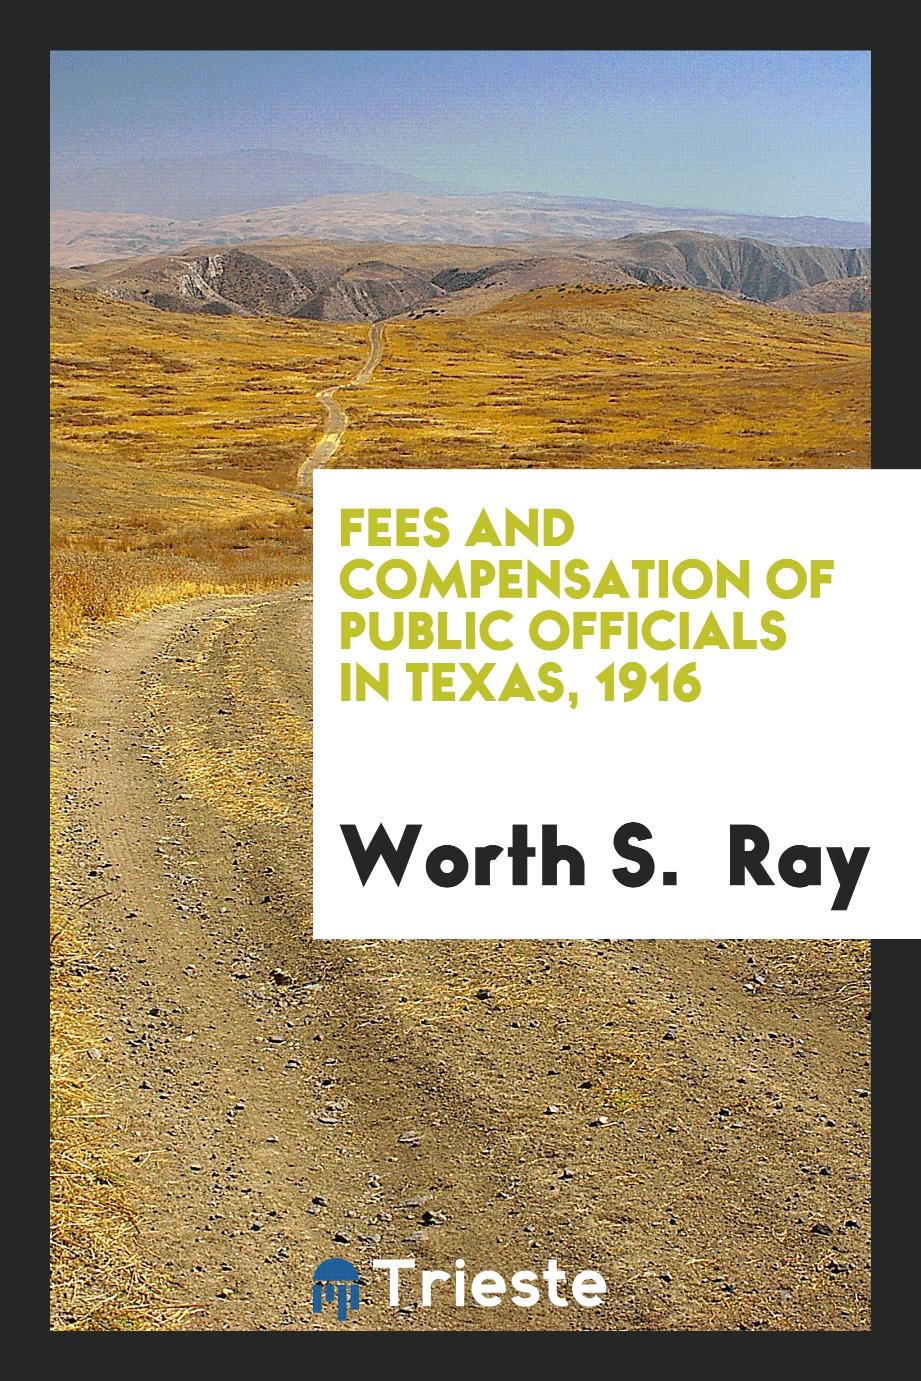 Fees and Compensation of Public Officials in Texas, 1916